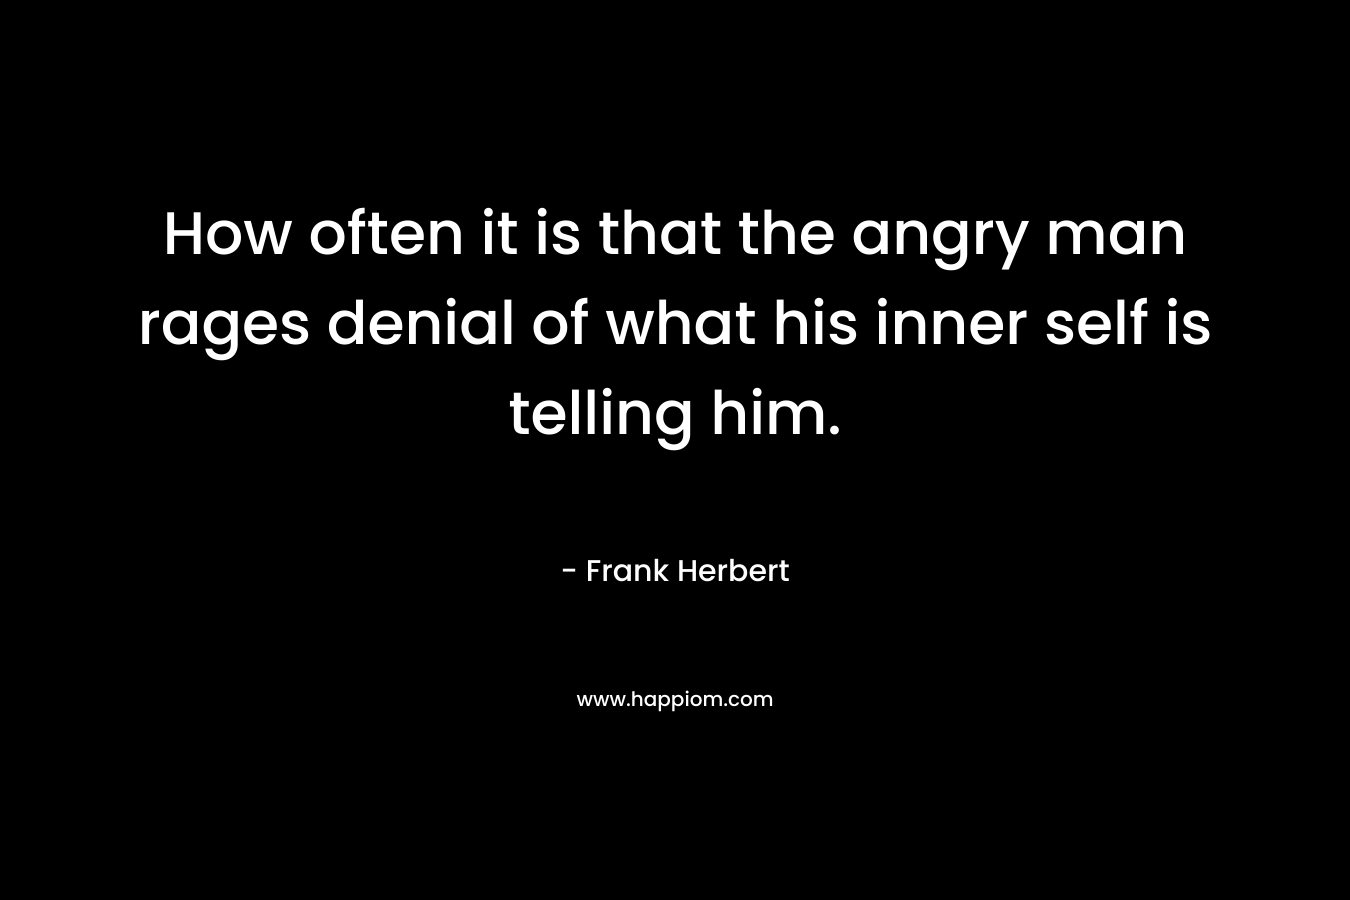 How often it is that the angry man rages denial of what his inner self is telling him. – Frank Herbert